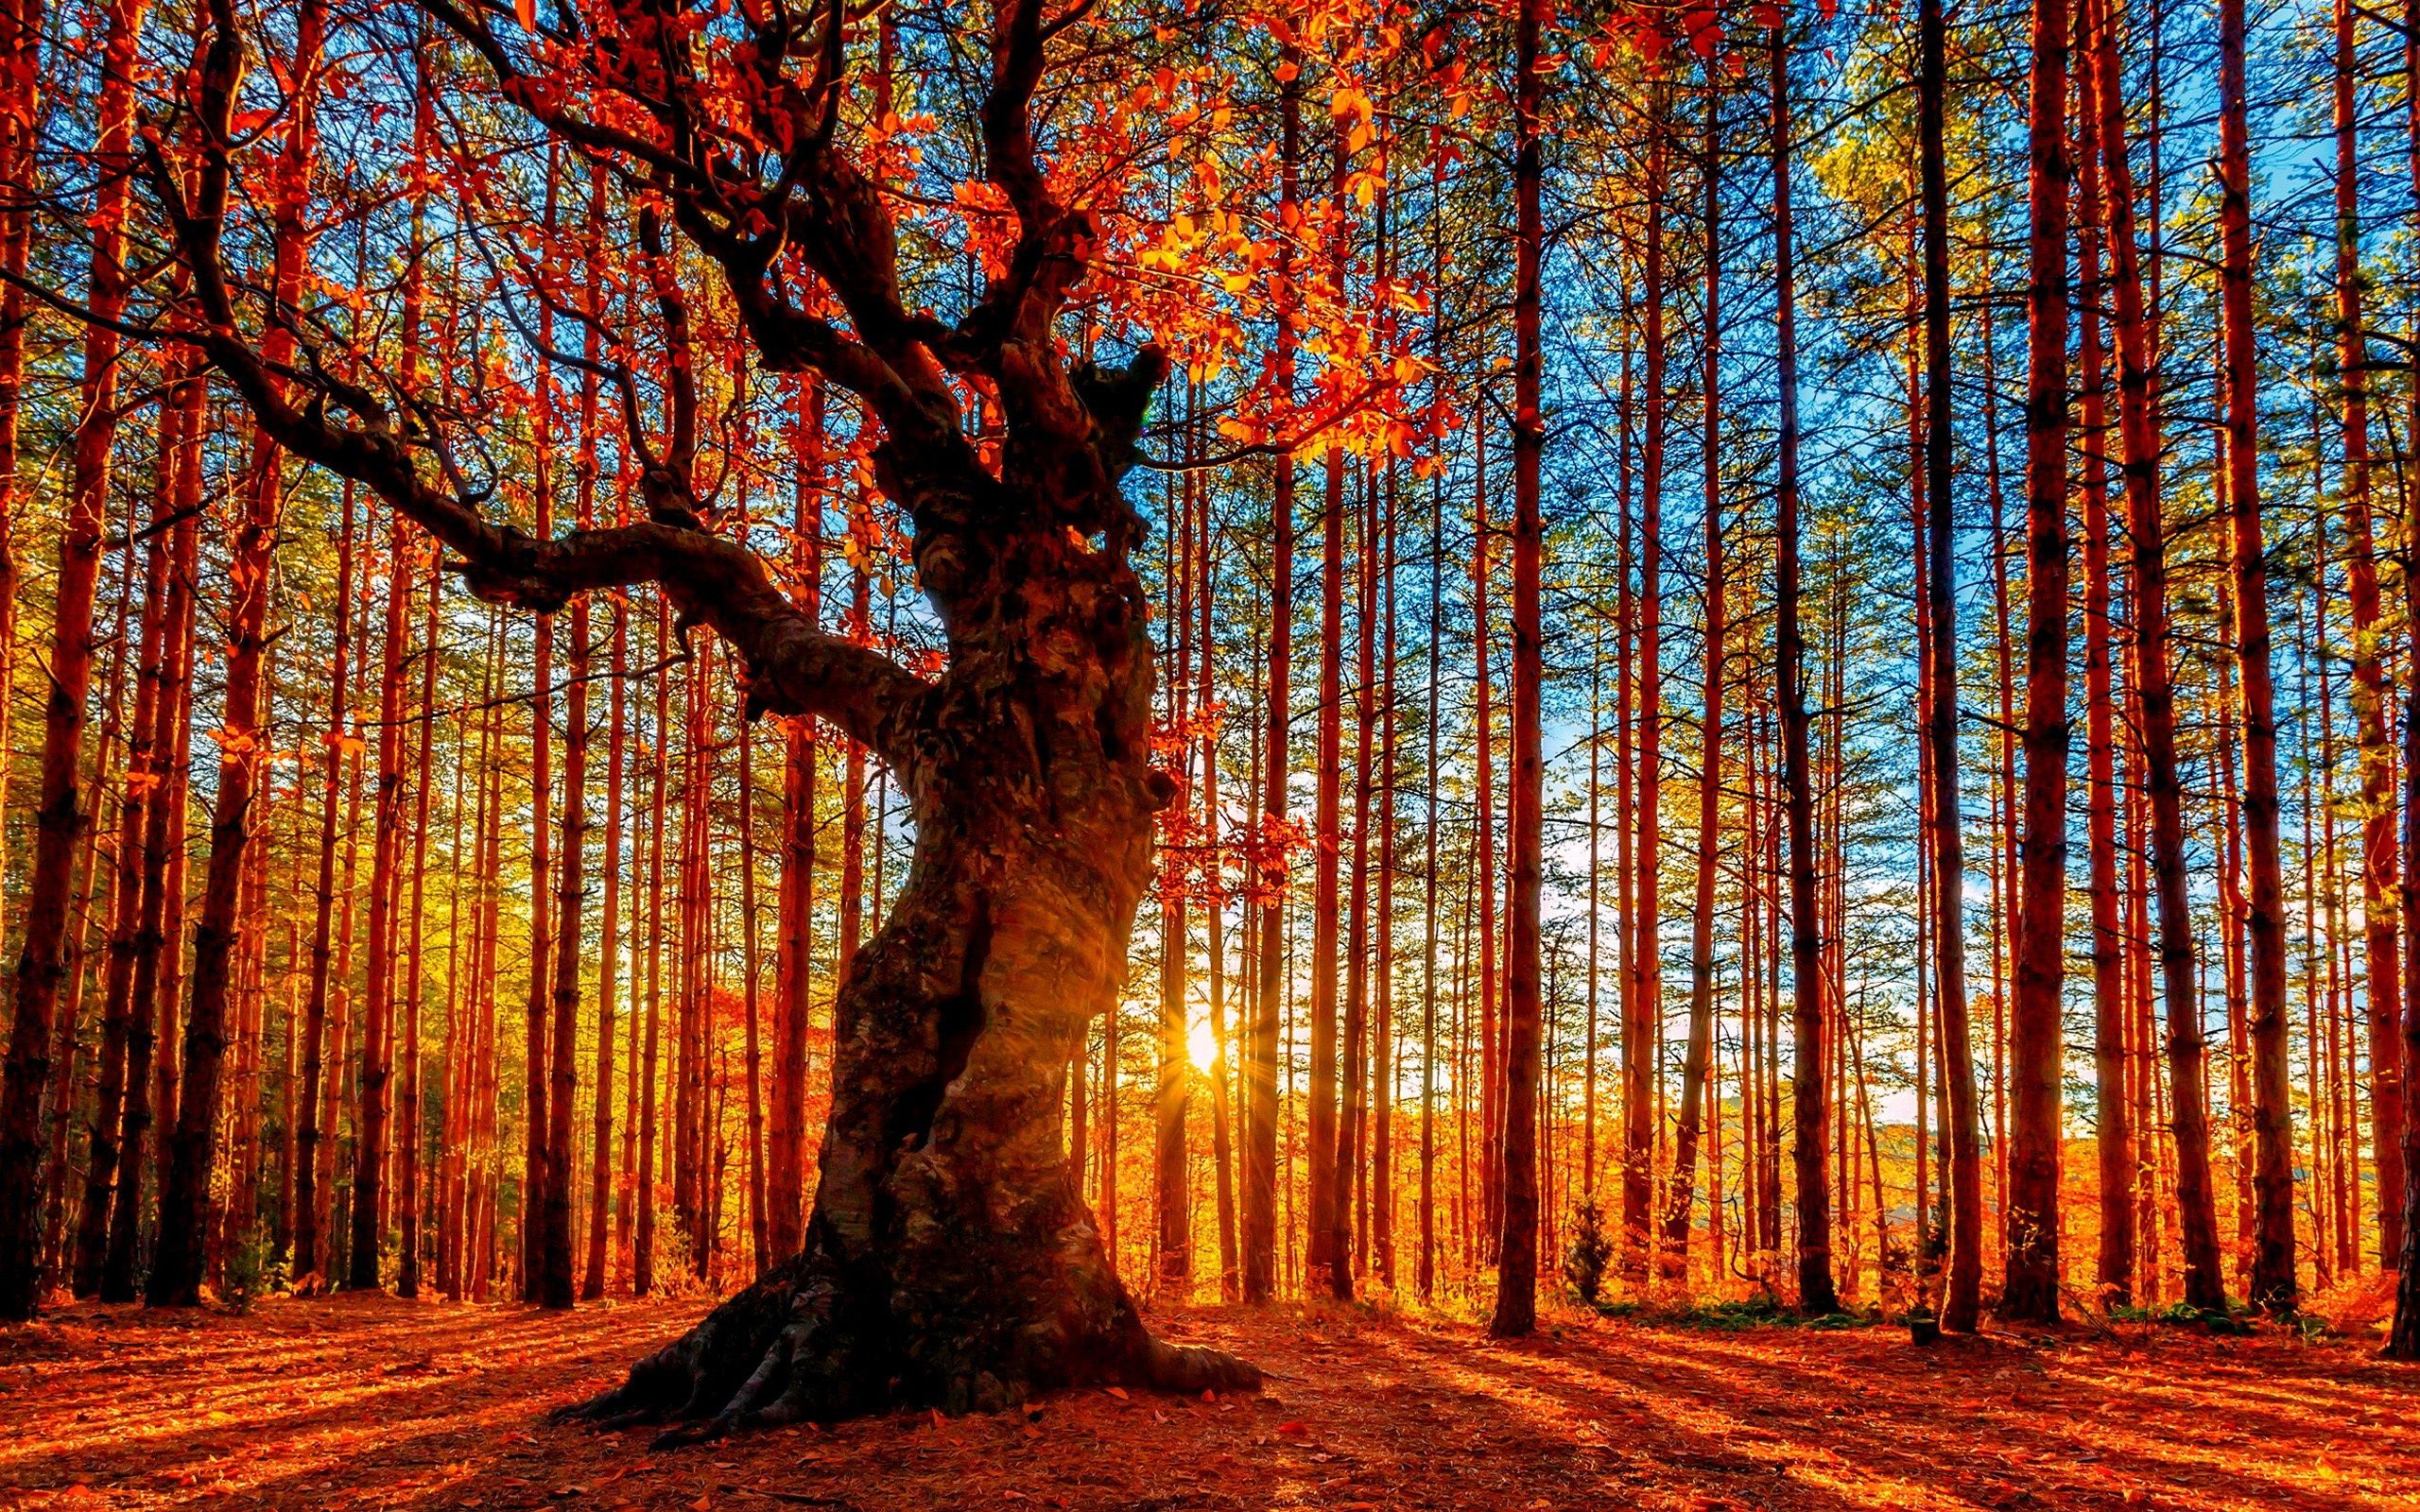 Beautiful autumn sunset forest, trees, red leaves Wallpaperx1600 resolution wallpaper download. Autumn forest, Autumn trees, Scenery